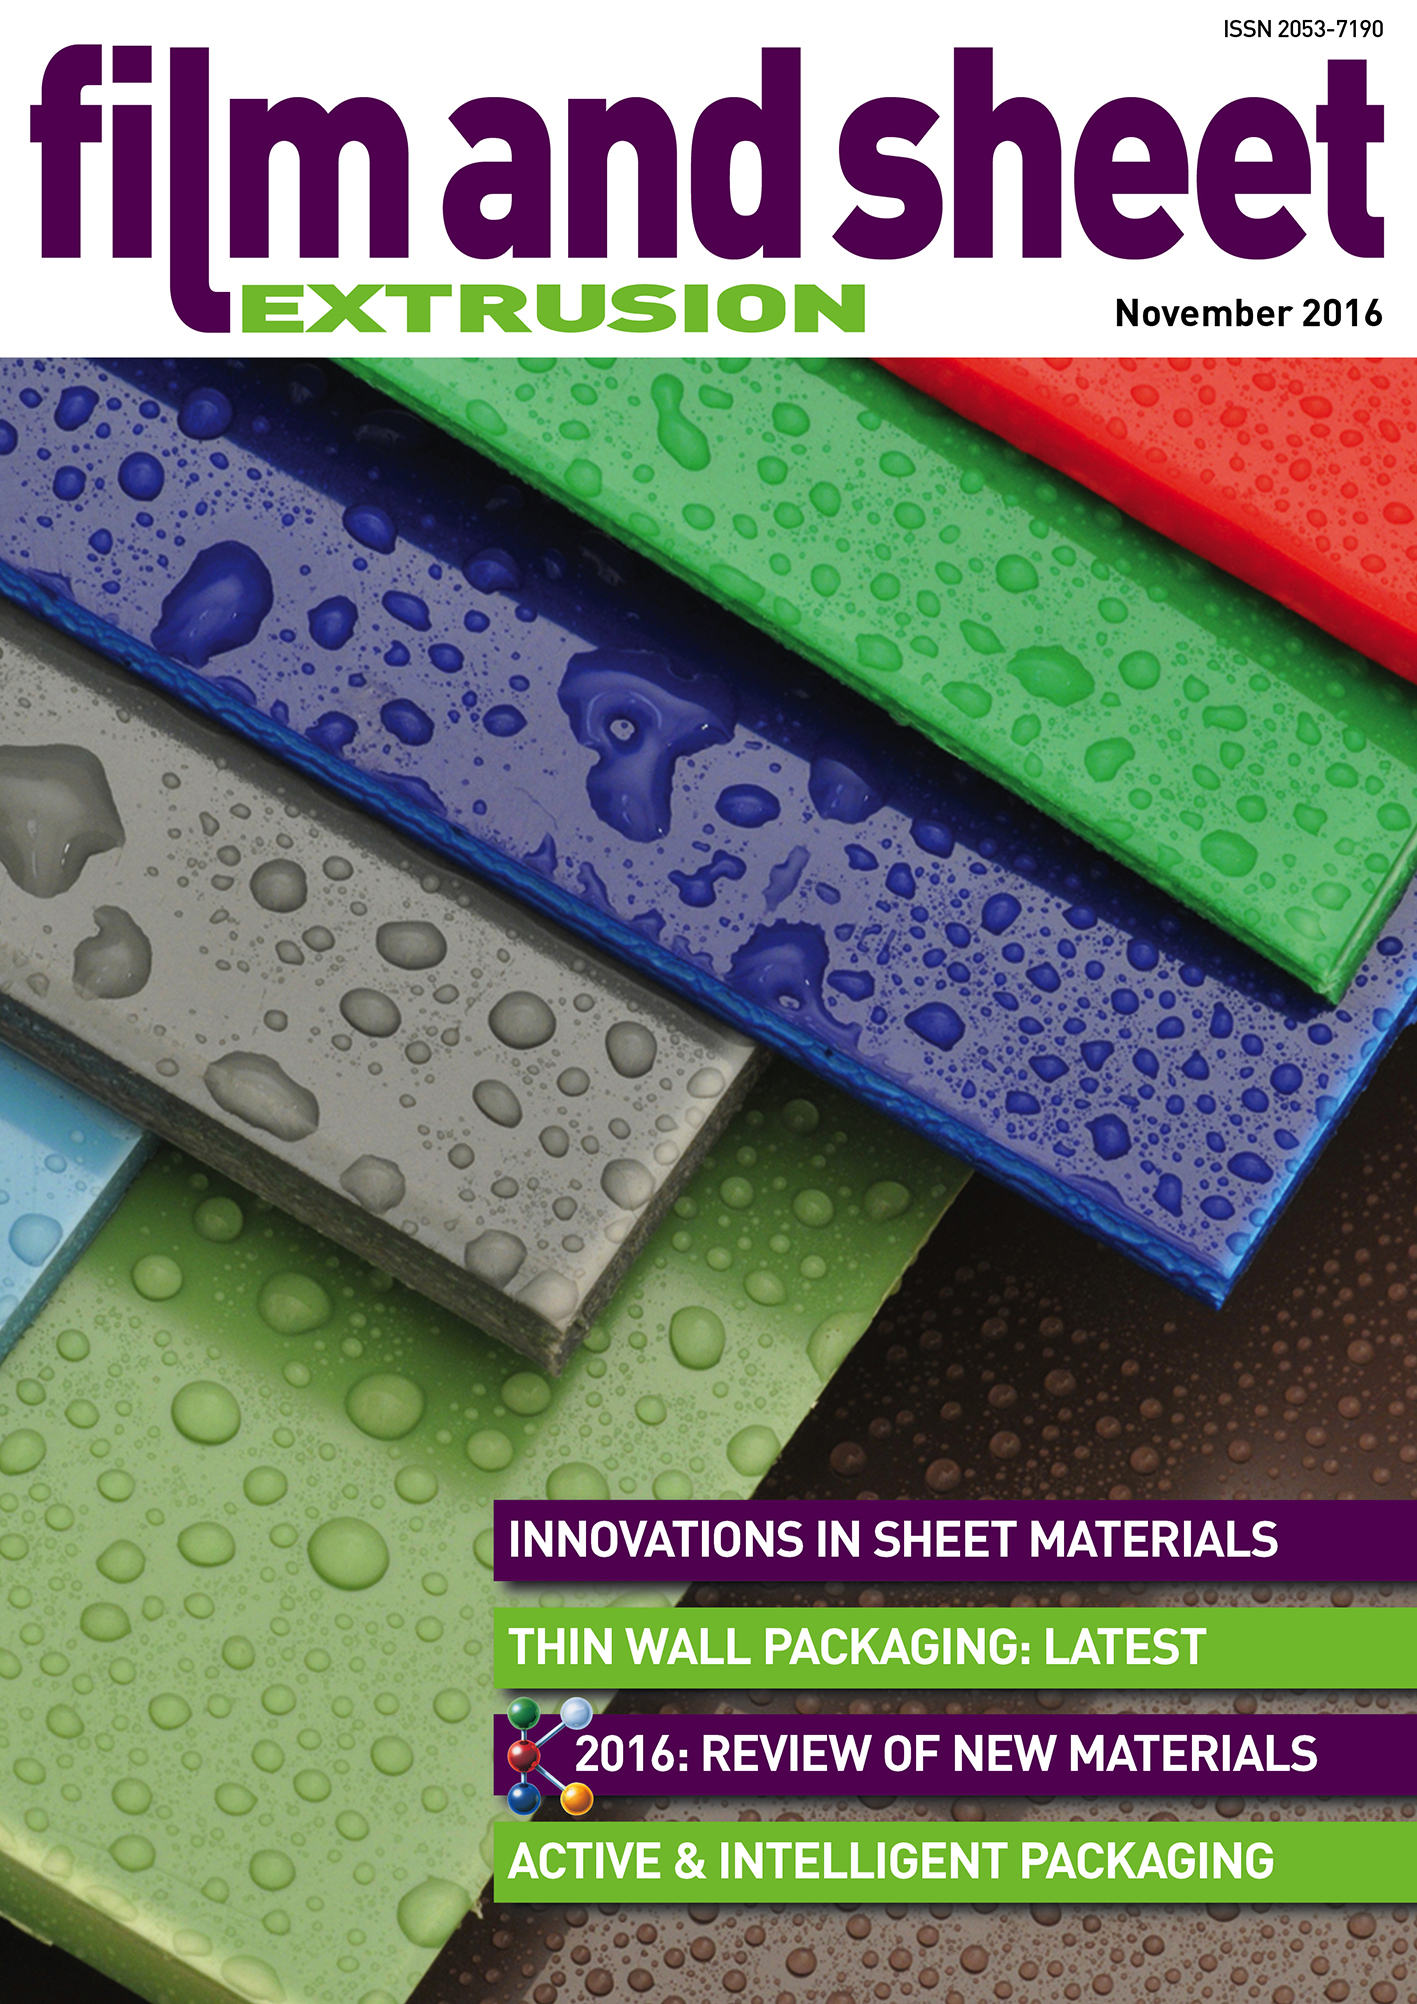 Film and Sheet Extrusion November 2016